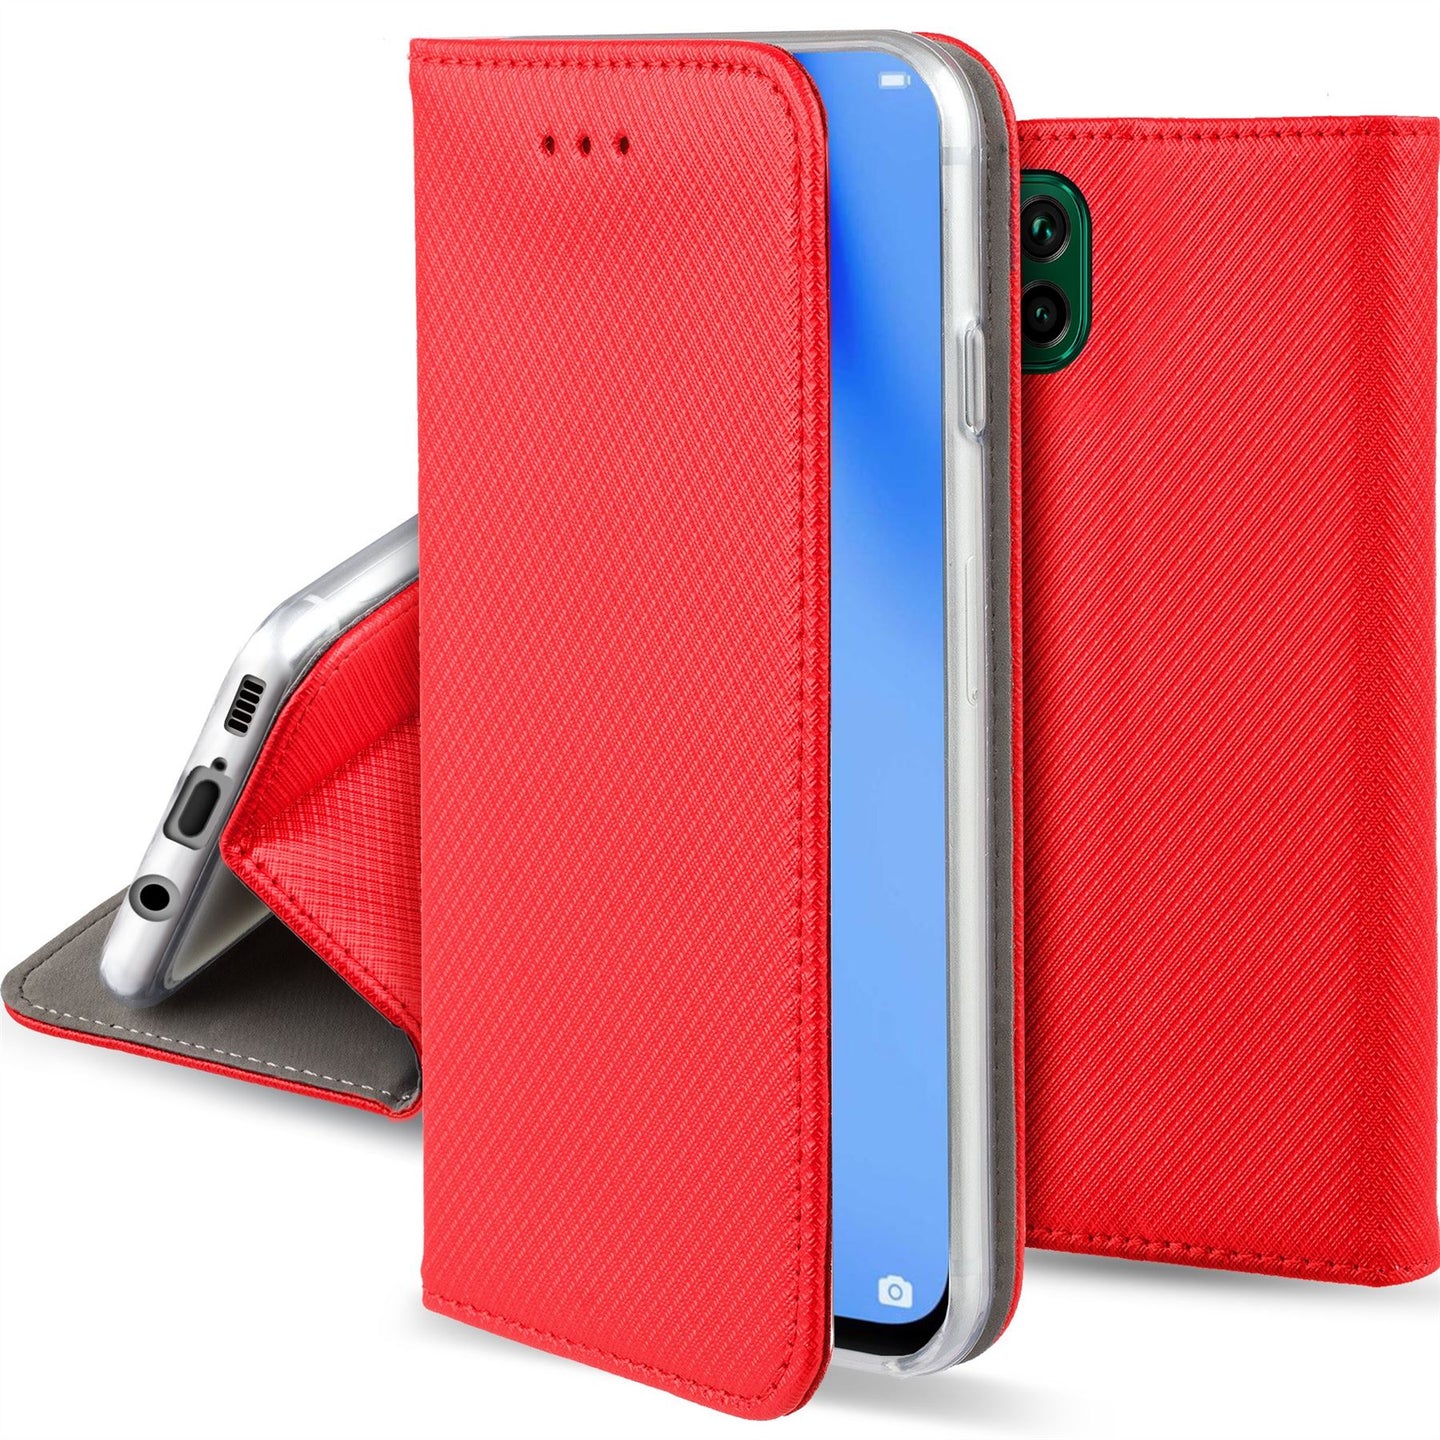 Moozy Case Flip Cover for Huawei P40 Lite, Red - Smart Magnetic Flip Case with Card Holder and Stand